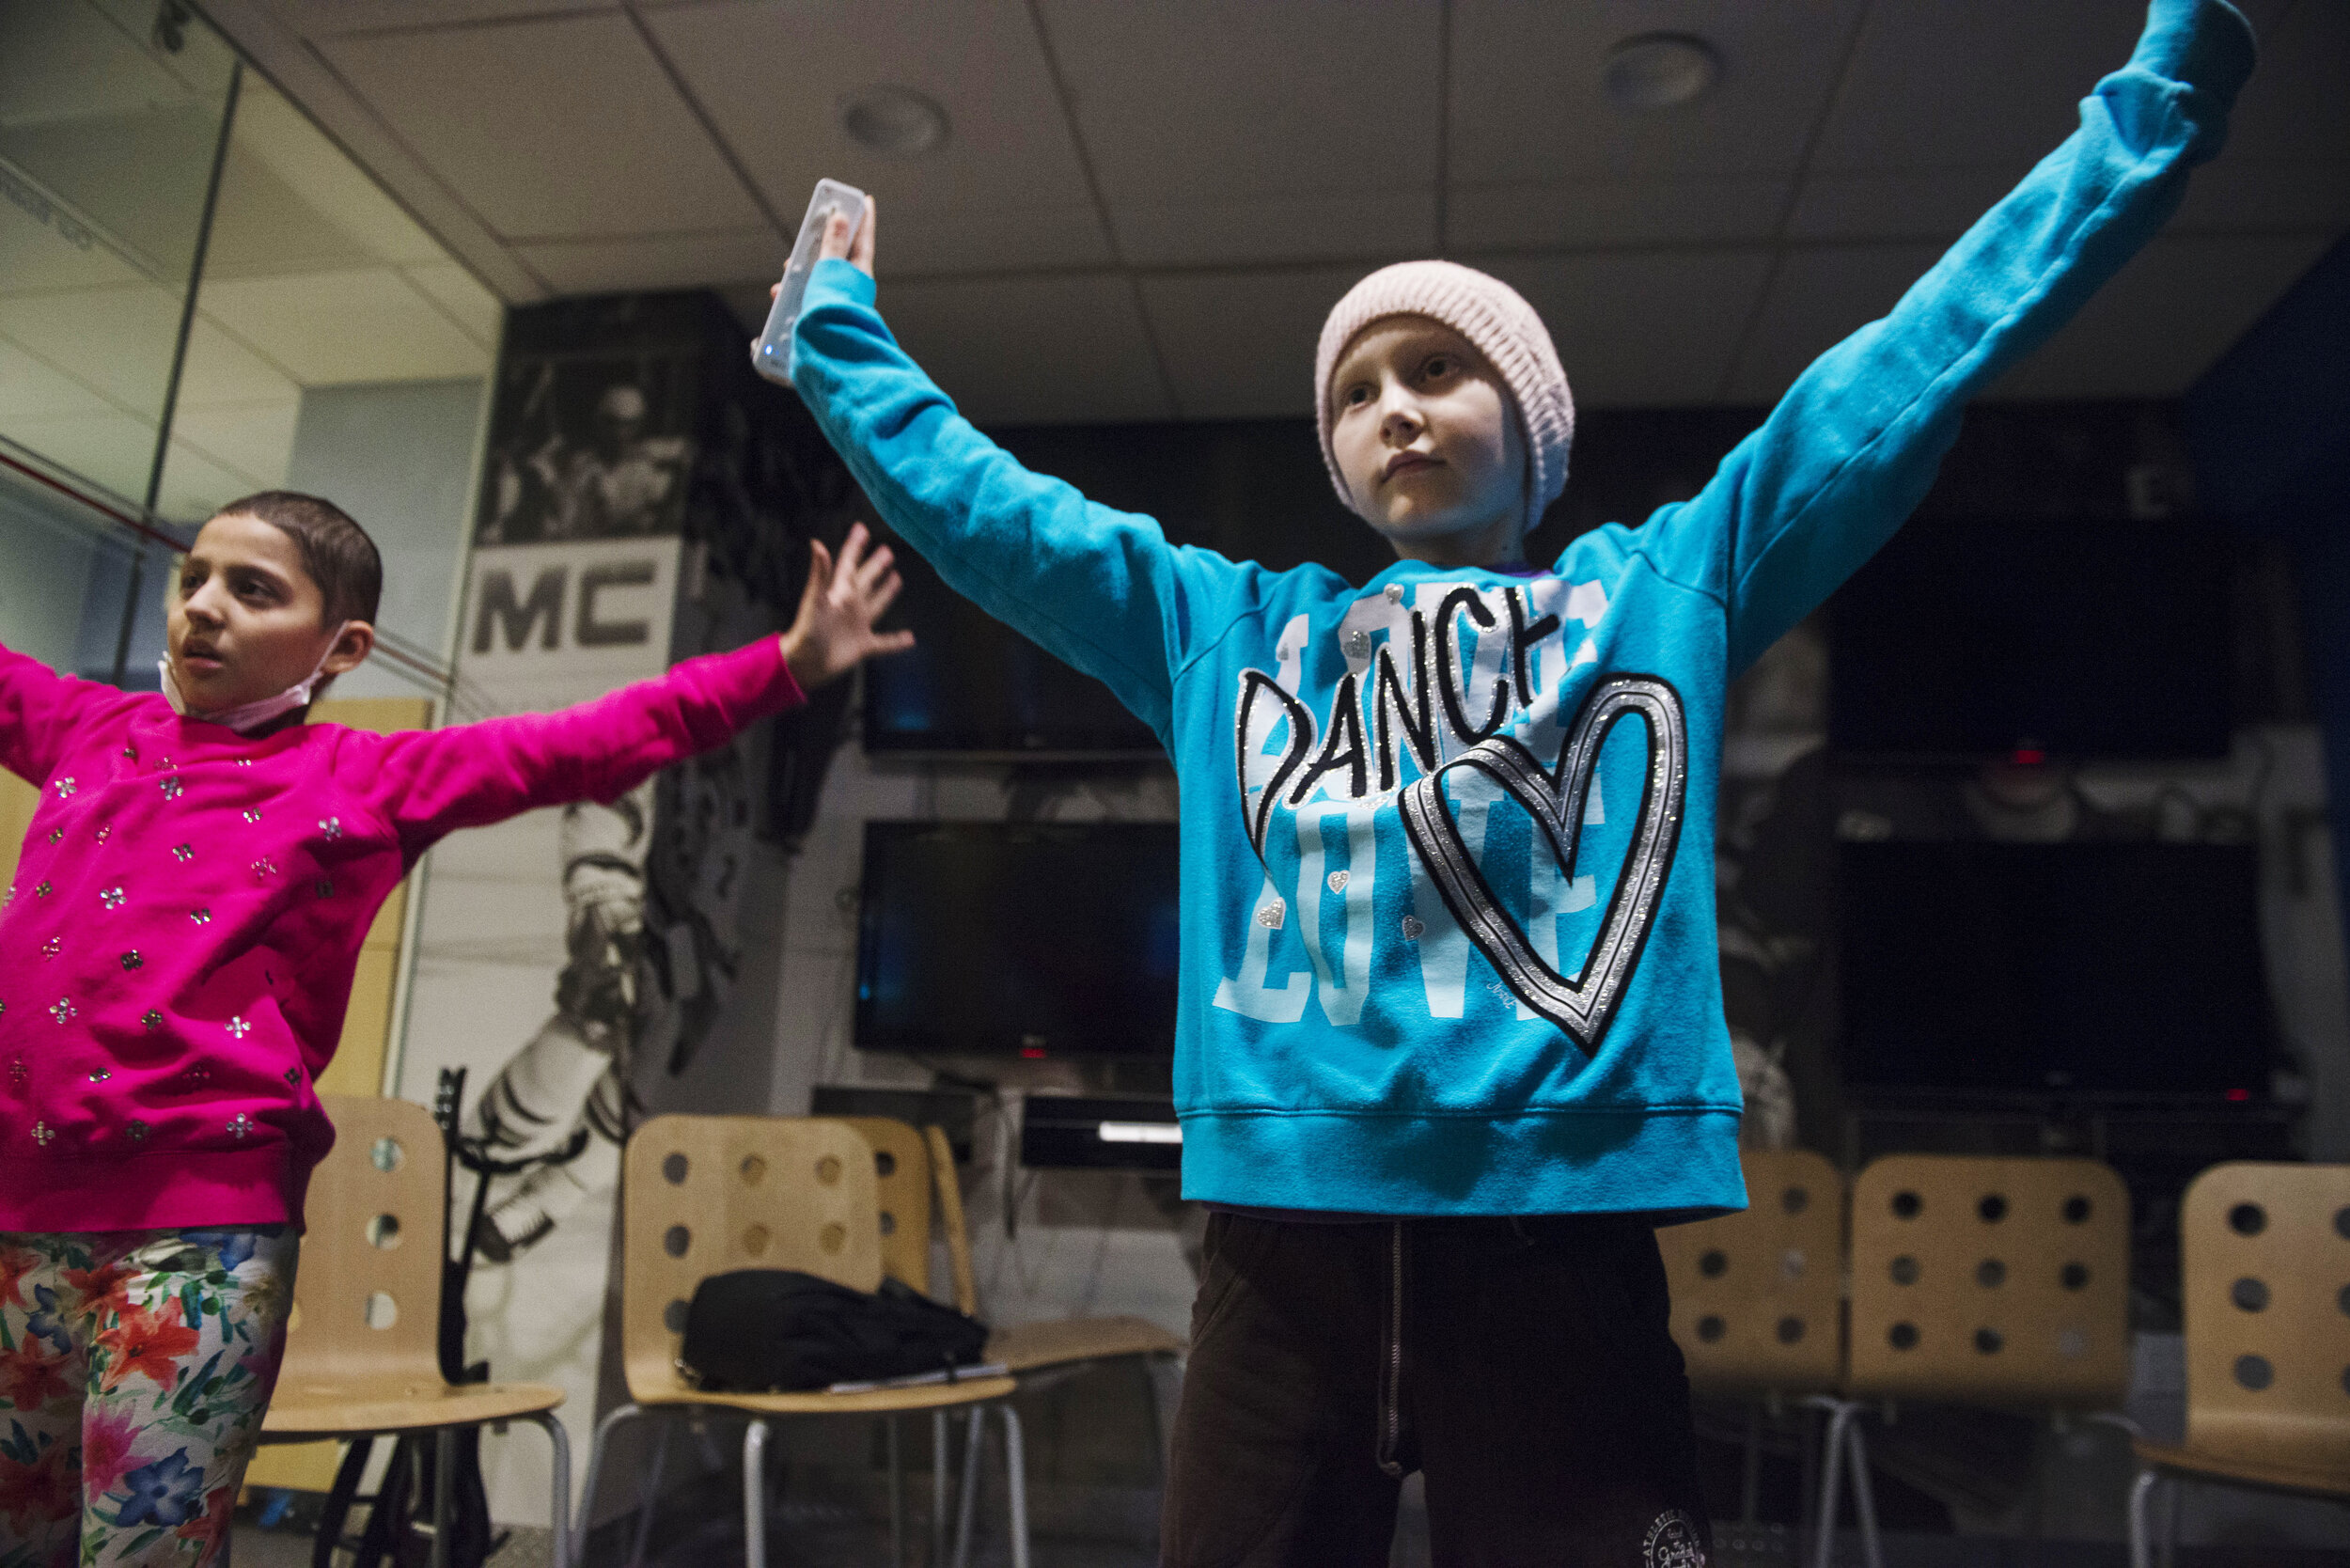  Peyton, right, and Myrrah Shapoo, 10, dance while playing video games in the playroom of the Ronald McDonald House. 